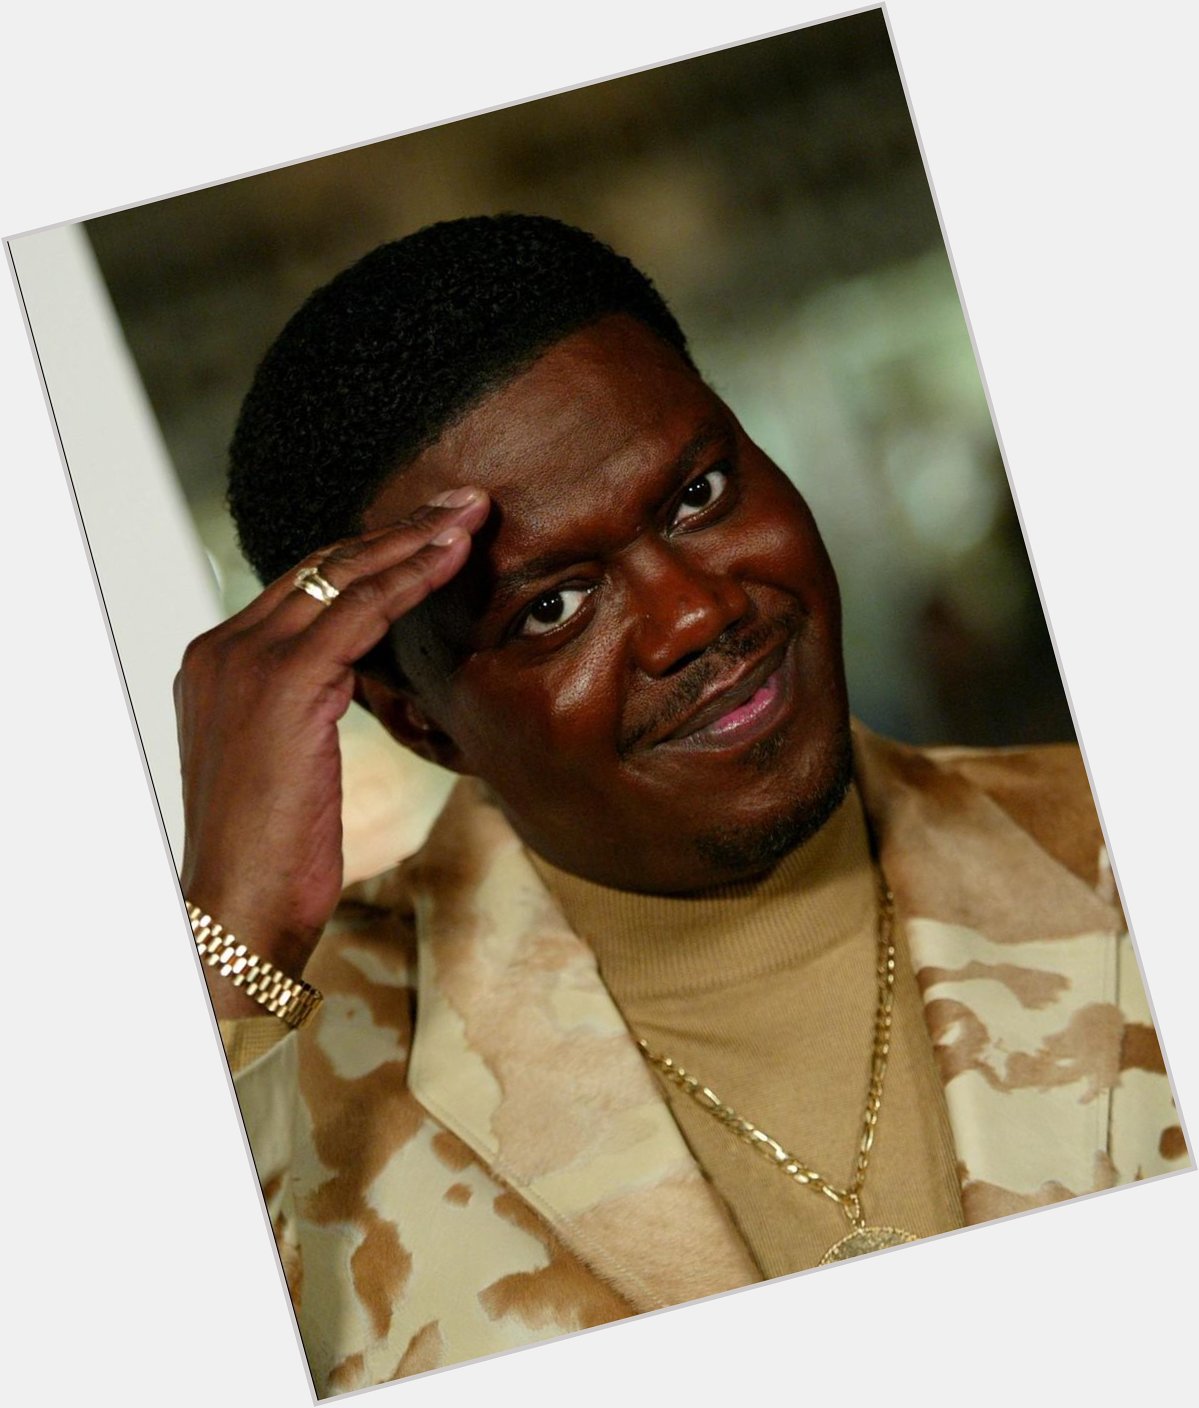 Happy Birthday to Bernie Mac, who would have turned 58 today! 